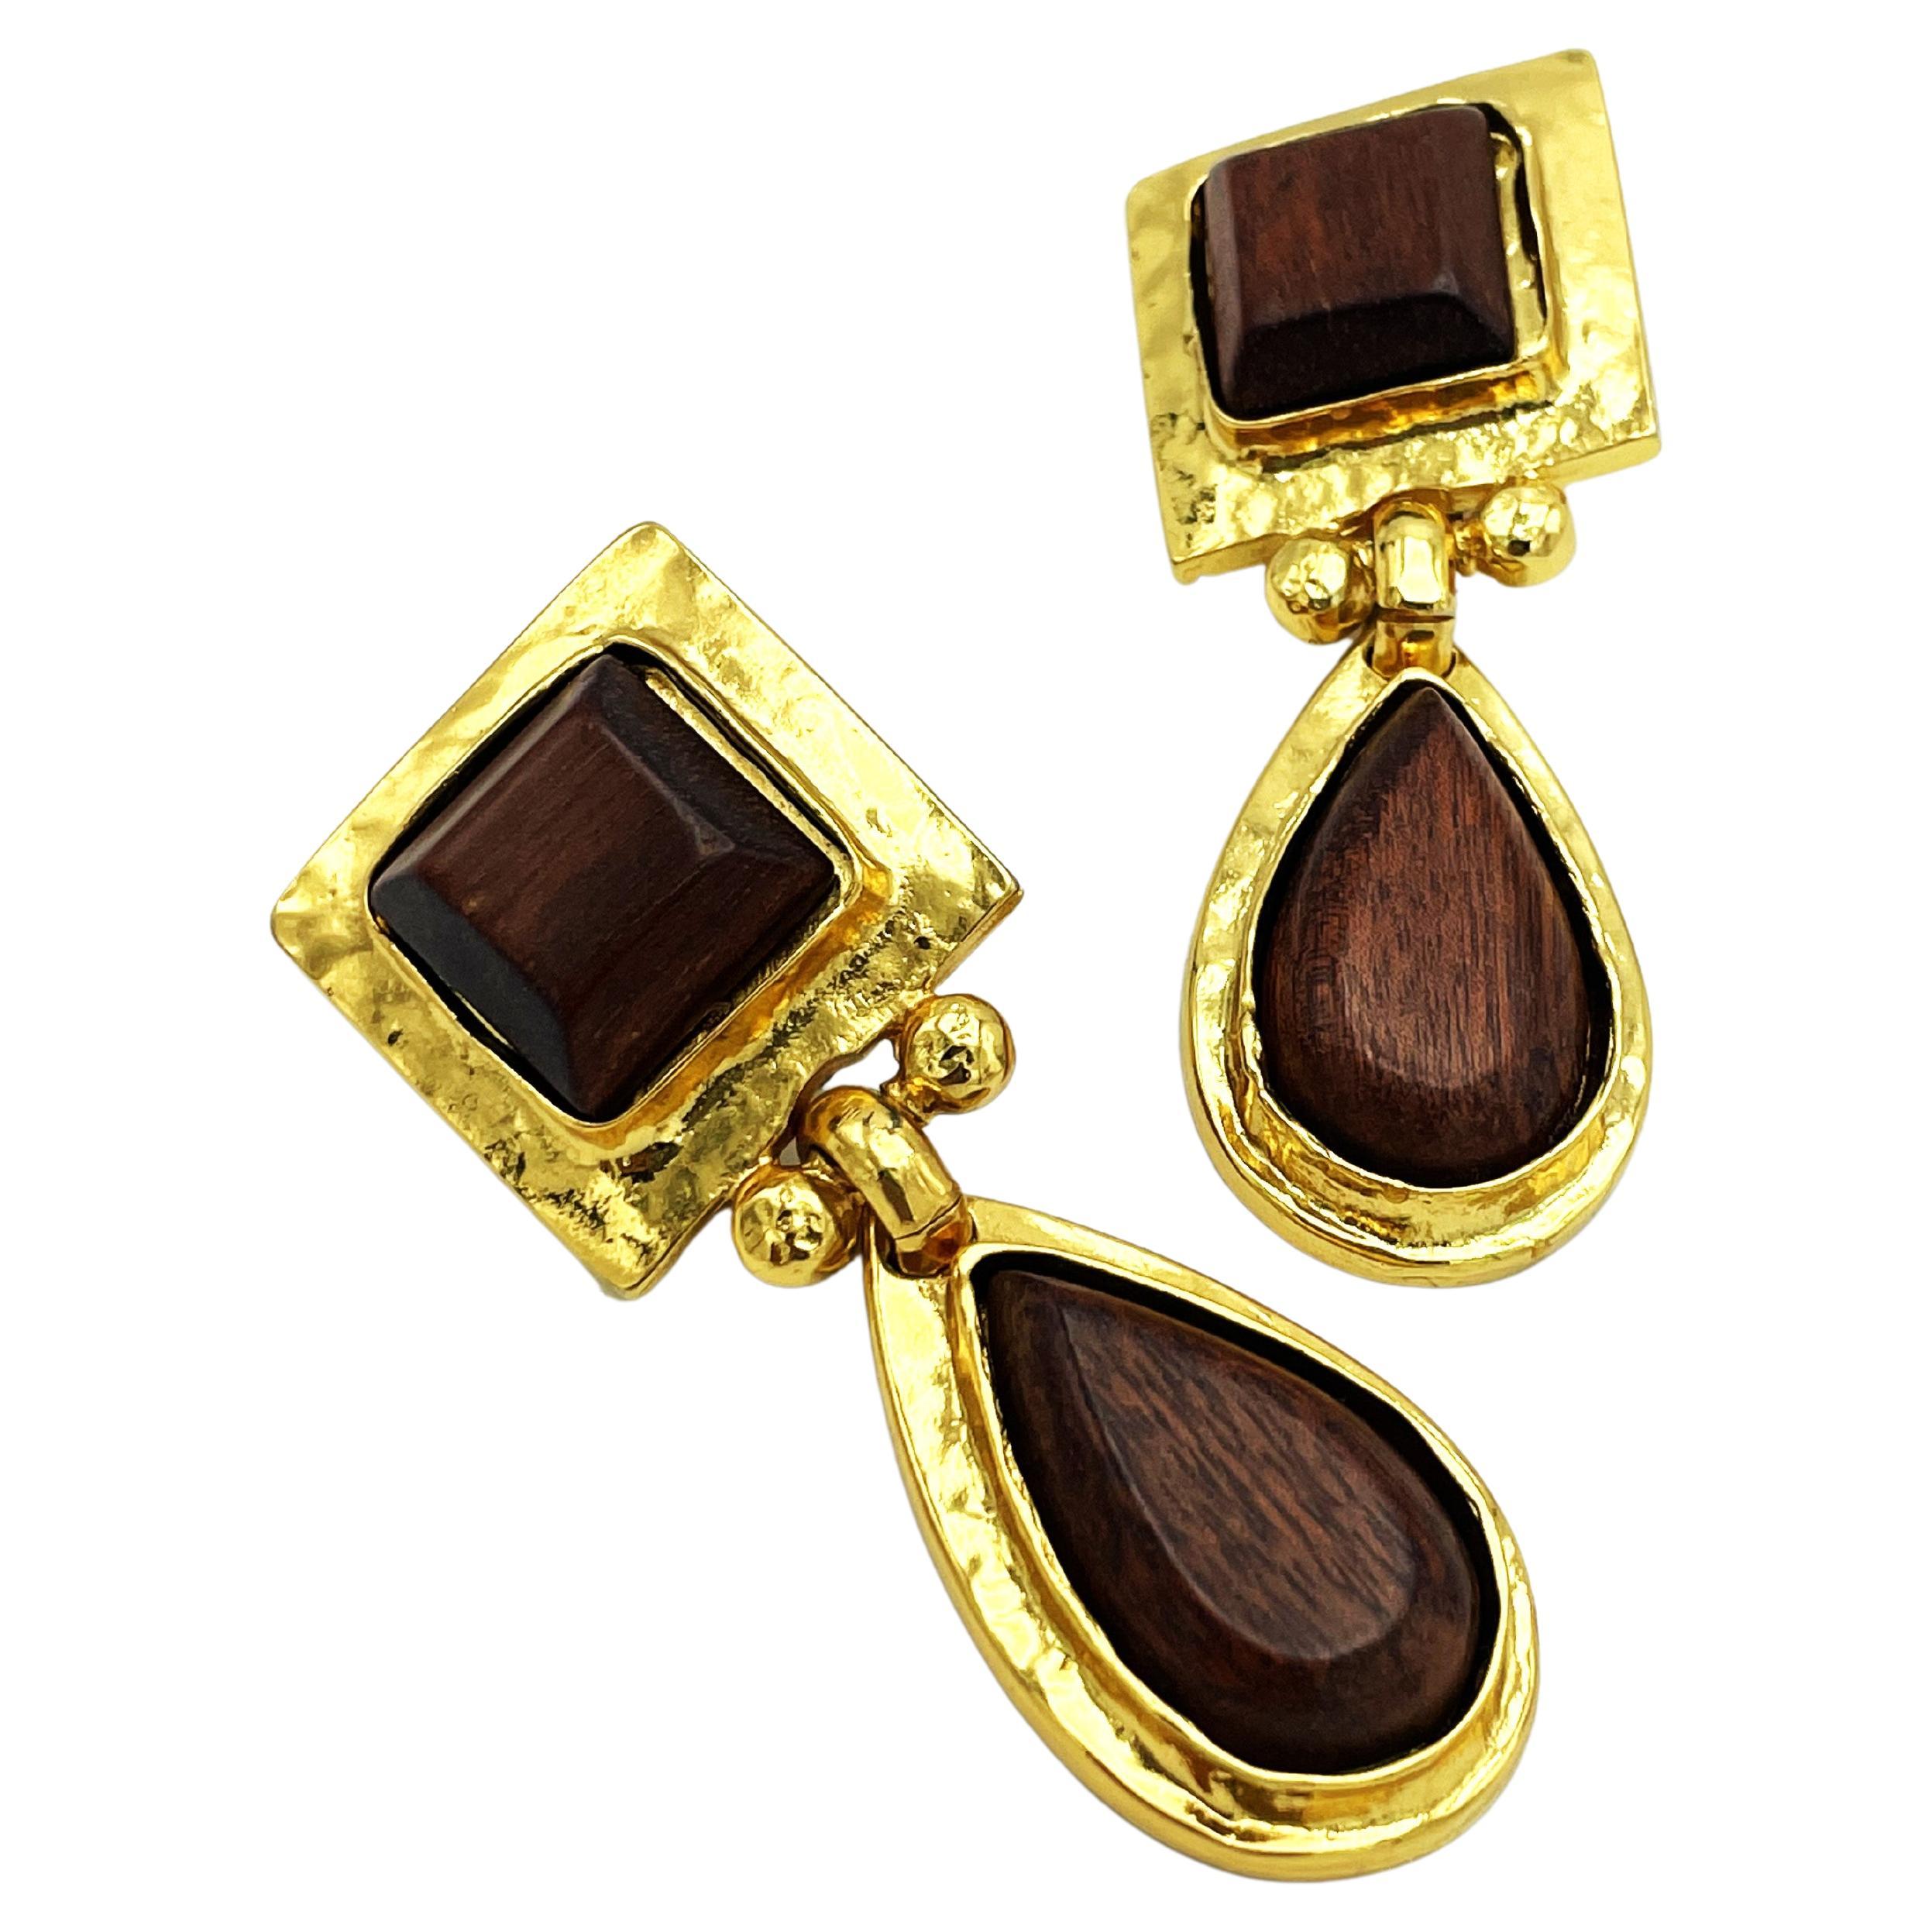 Clip-on earring by Eduard Rambaud Paris, 2 parts with wood filling, gilded  For Sale